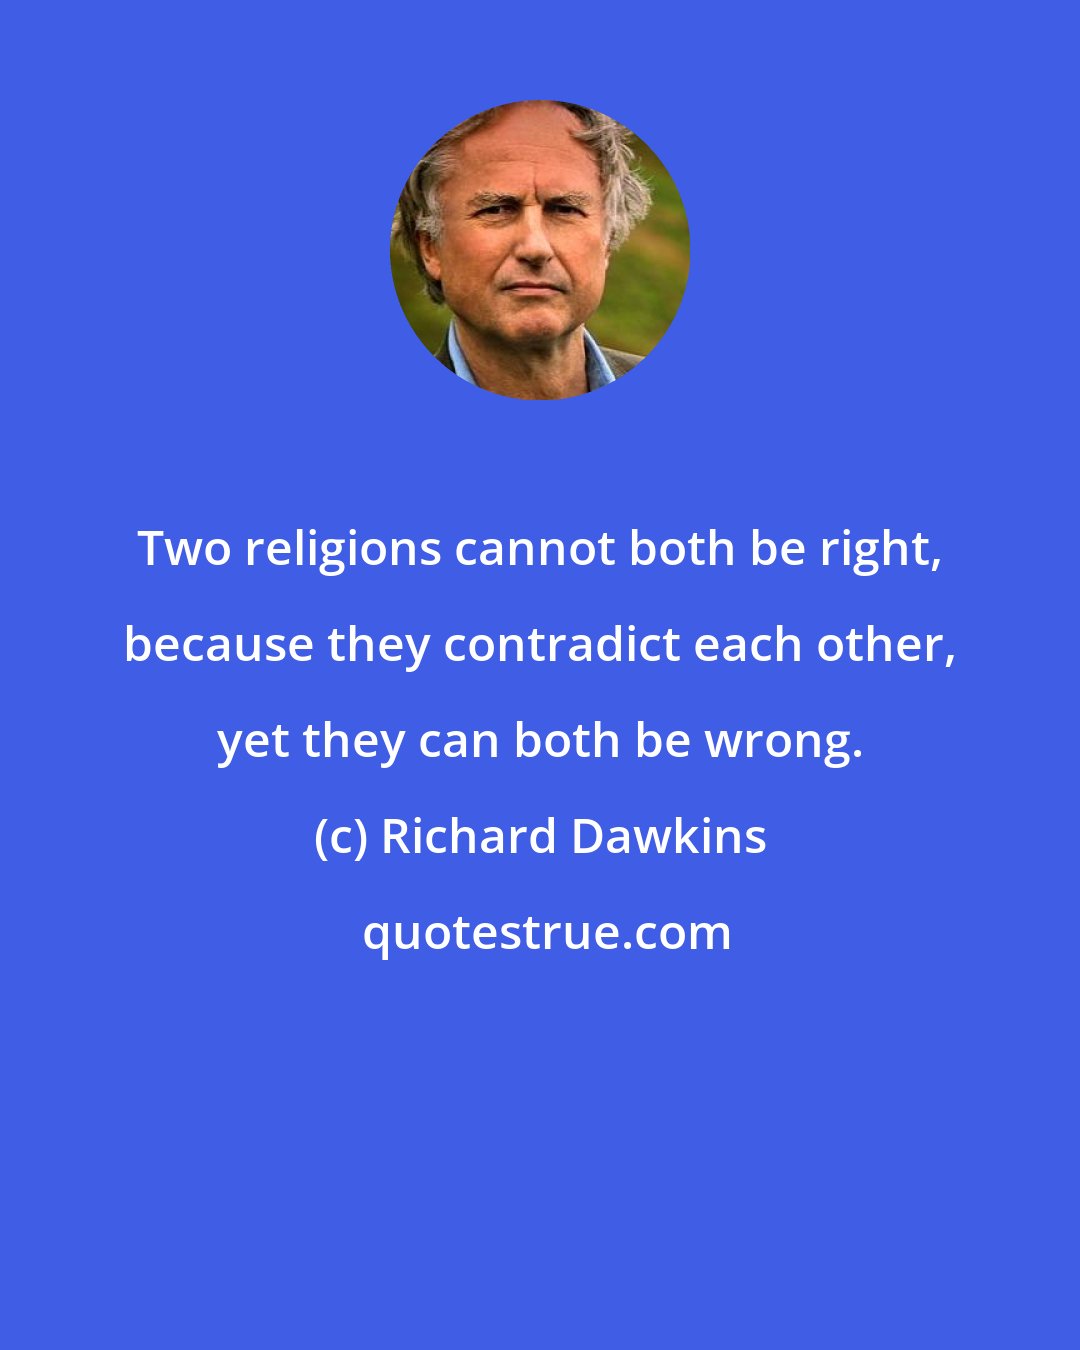 Richard Dawkins: Two religions cannot both be right, because they contradict each other, yet they can both be wrong.